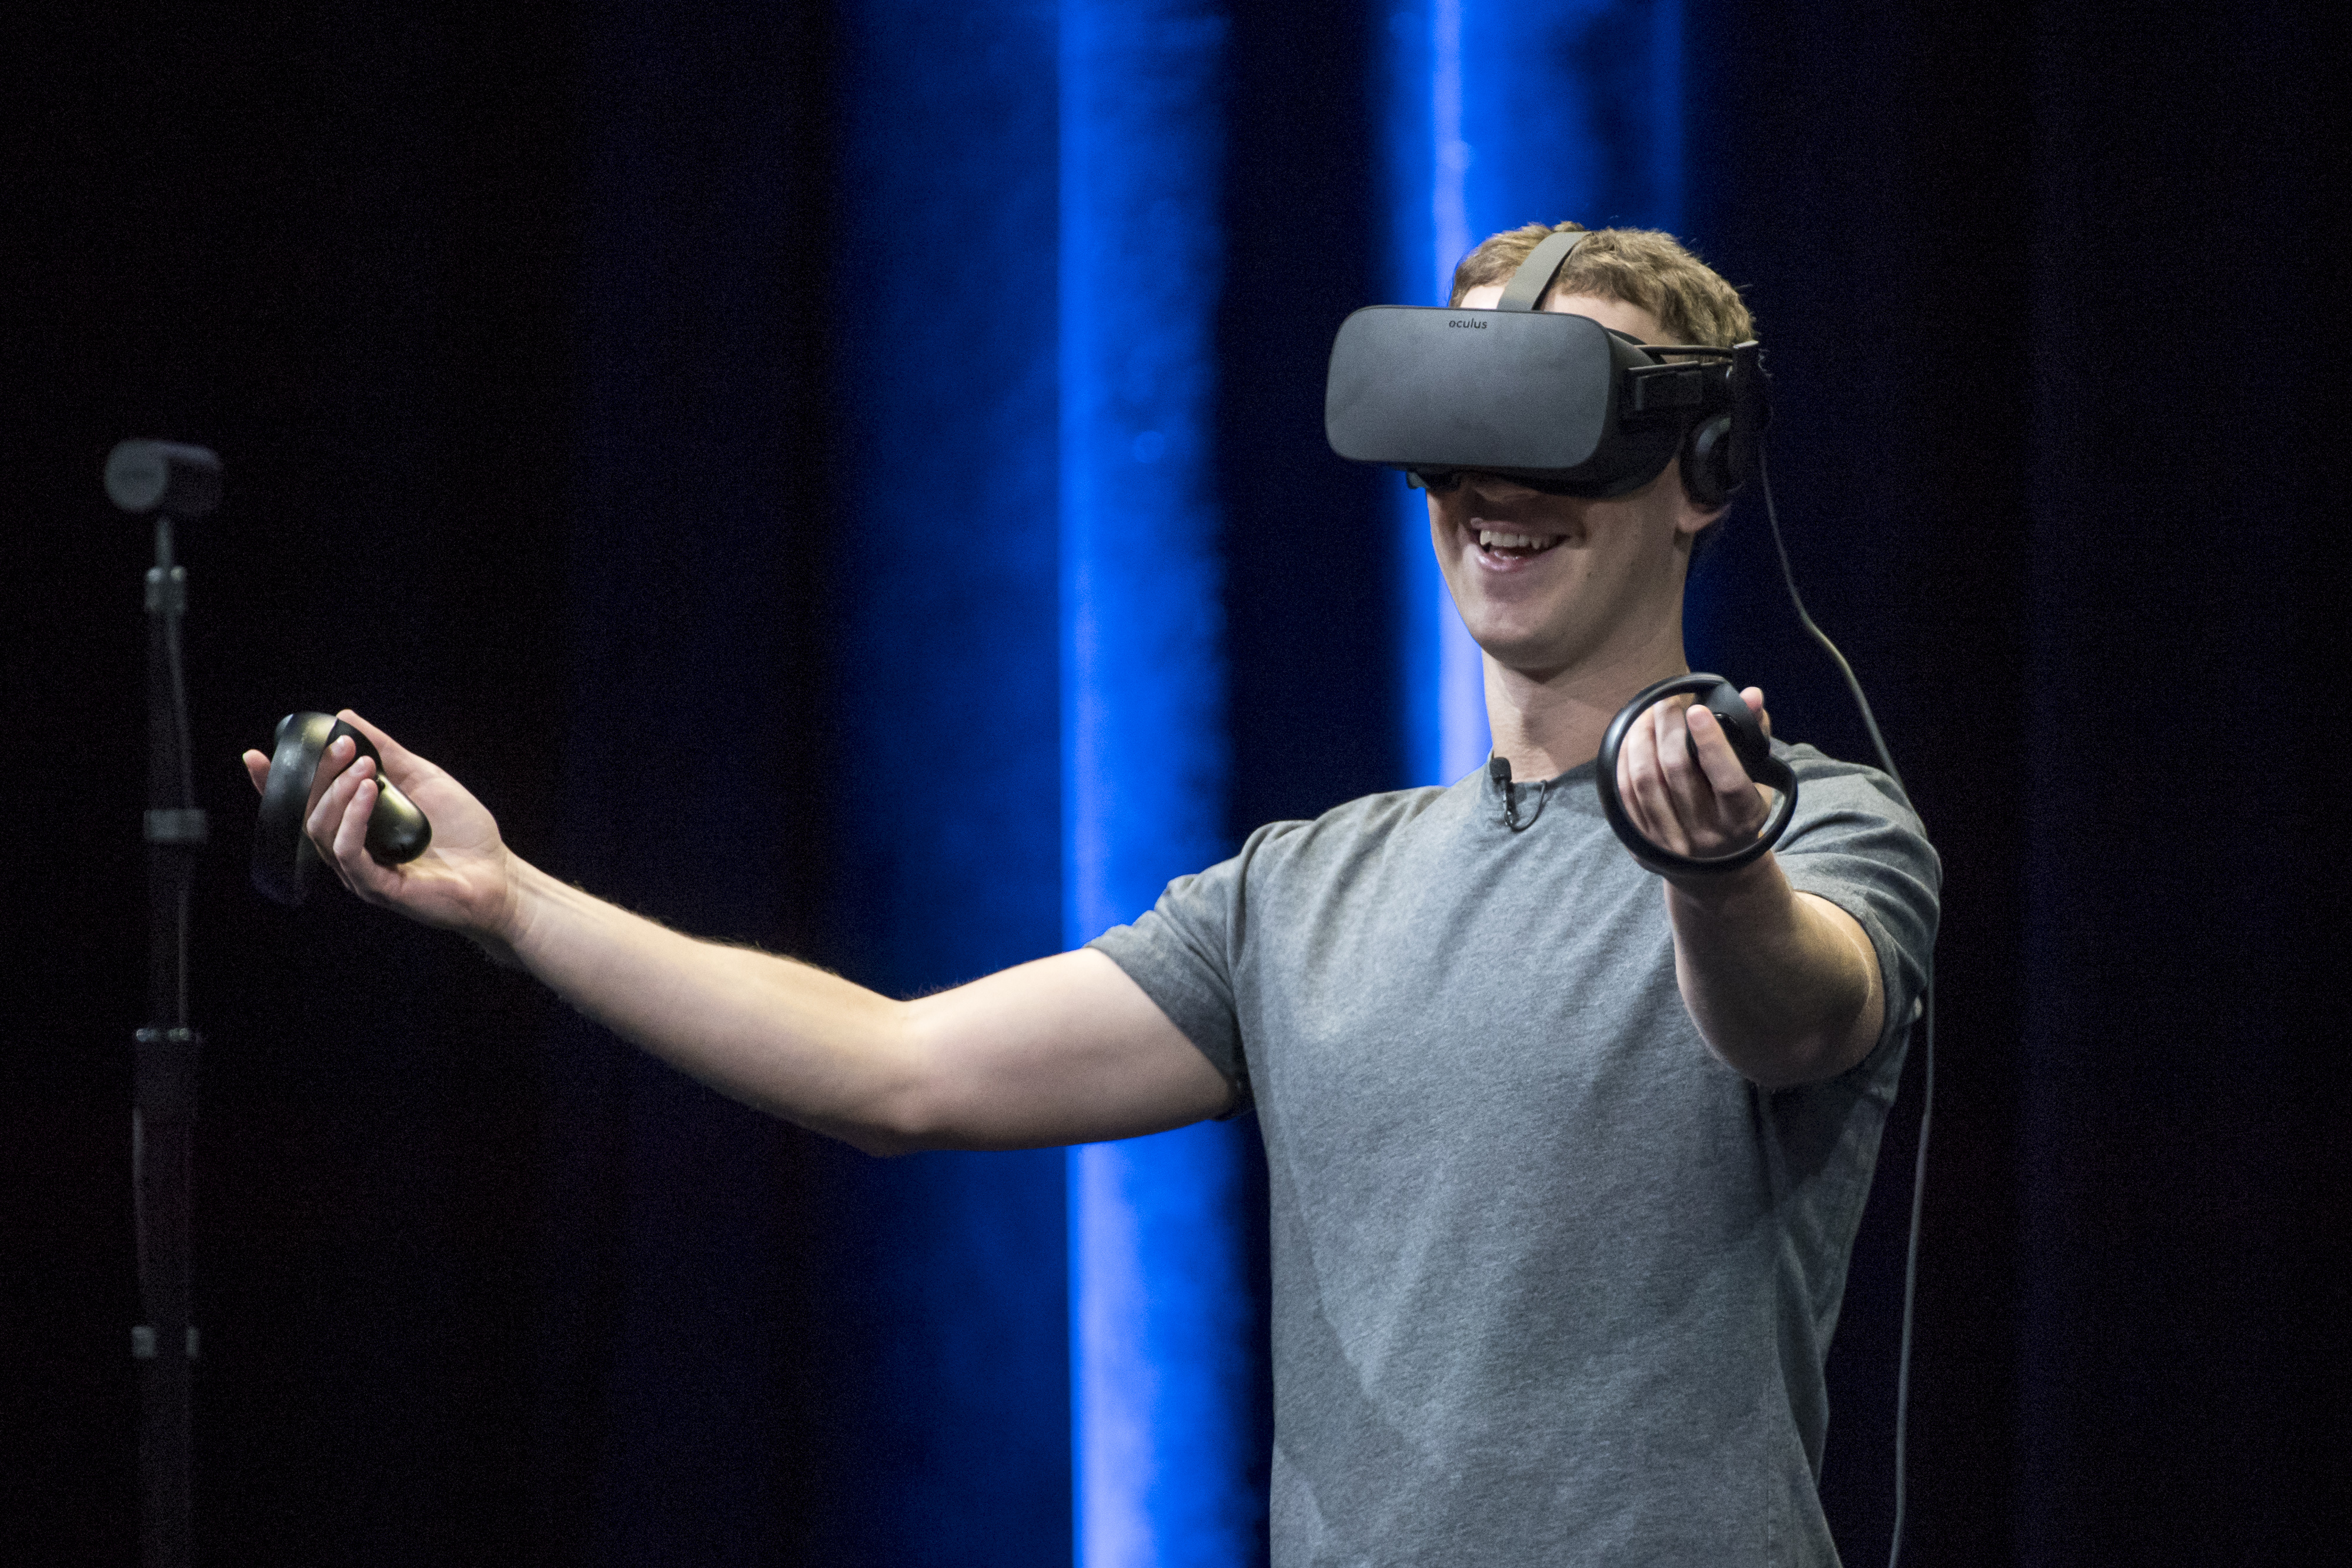 Mark Zuckerberg, chief executive officer and founder of Facebook Inc., demonstrates an Oculus Rift virtual reality (VR) headset and Oculus Touch controllers as the gives a demonstration during the Oculus Connect 3 event in San Jose, California, U.S., on Thursday, Oct. 6, 2016. (Bloomberg&mdash;Bloomberg via Getty Images)